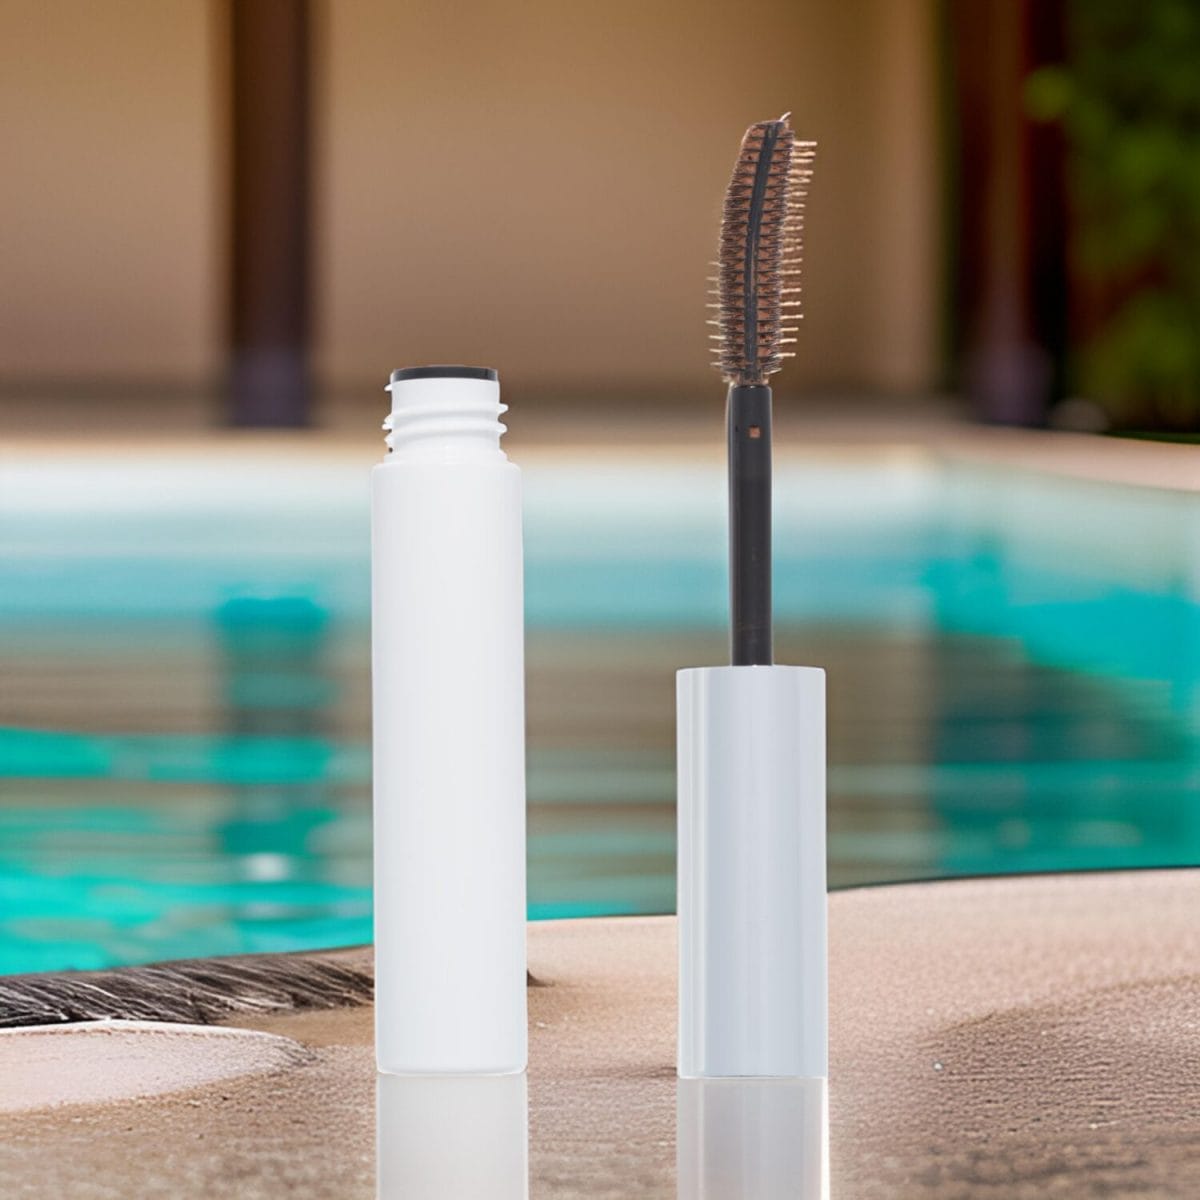 AI Eyelash Cosmetic Lifestyle Product Photography on a table at a resort spa pool